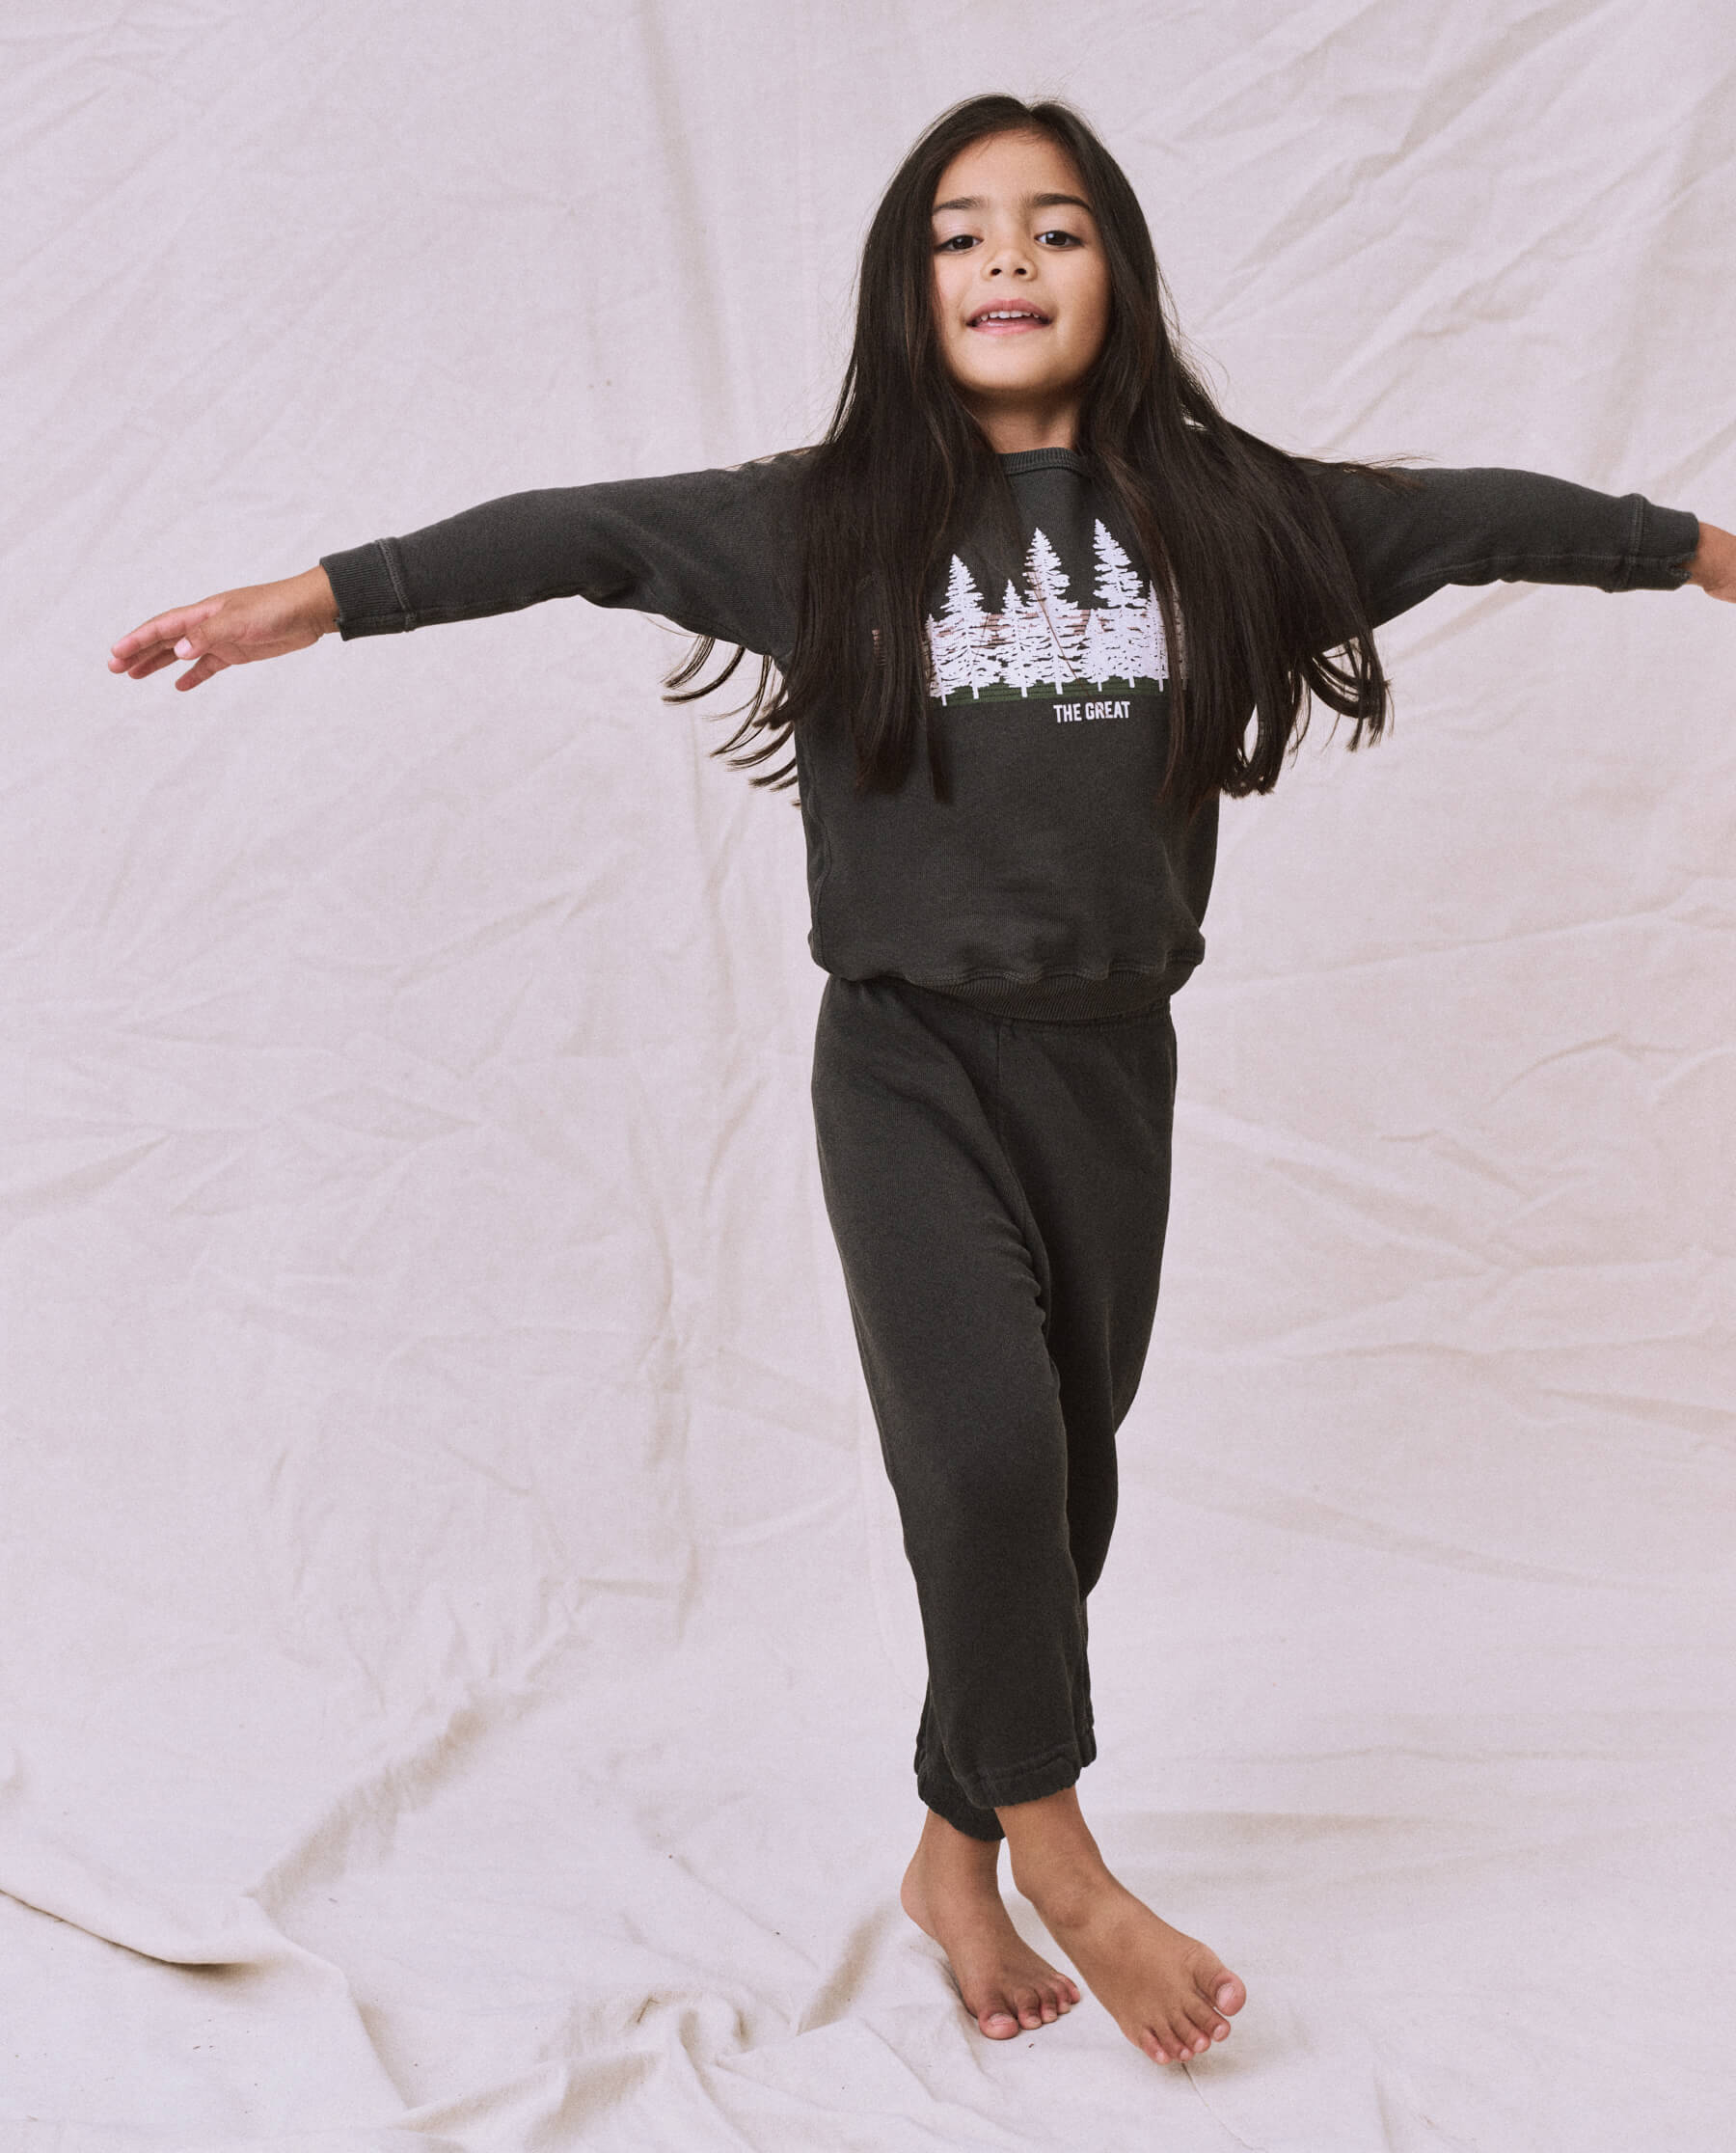 The Little Stadium Sweatpant. Solid -- Washed Black SWEATPANTS THE GREAT. SP22 D2 LITTLE